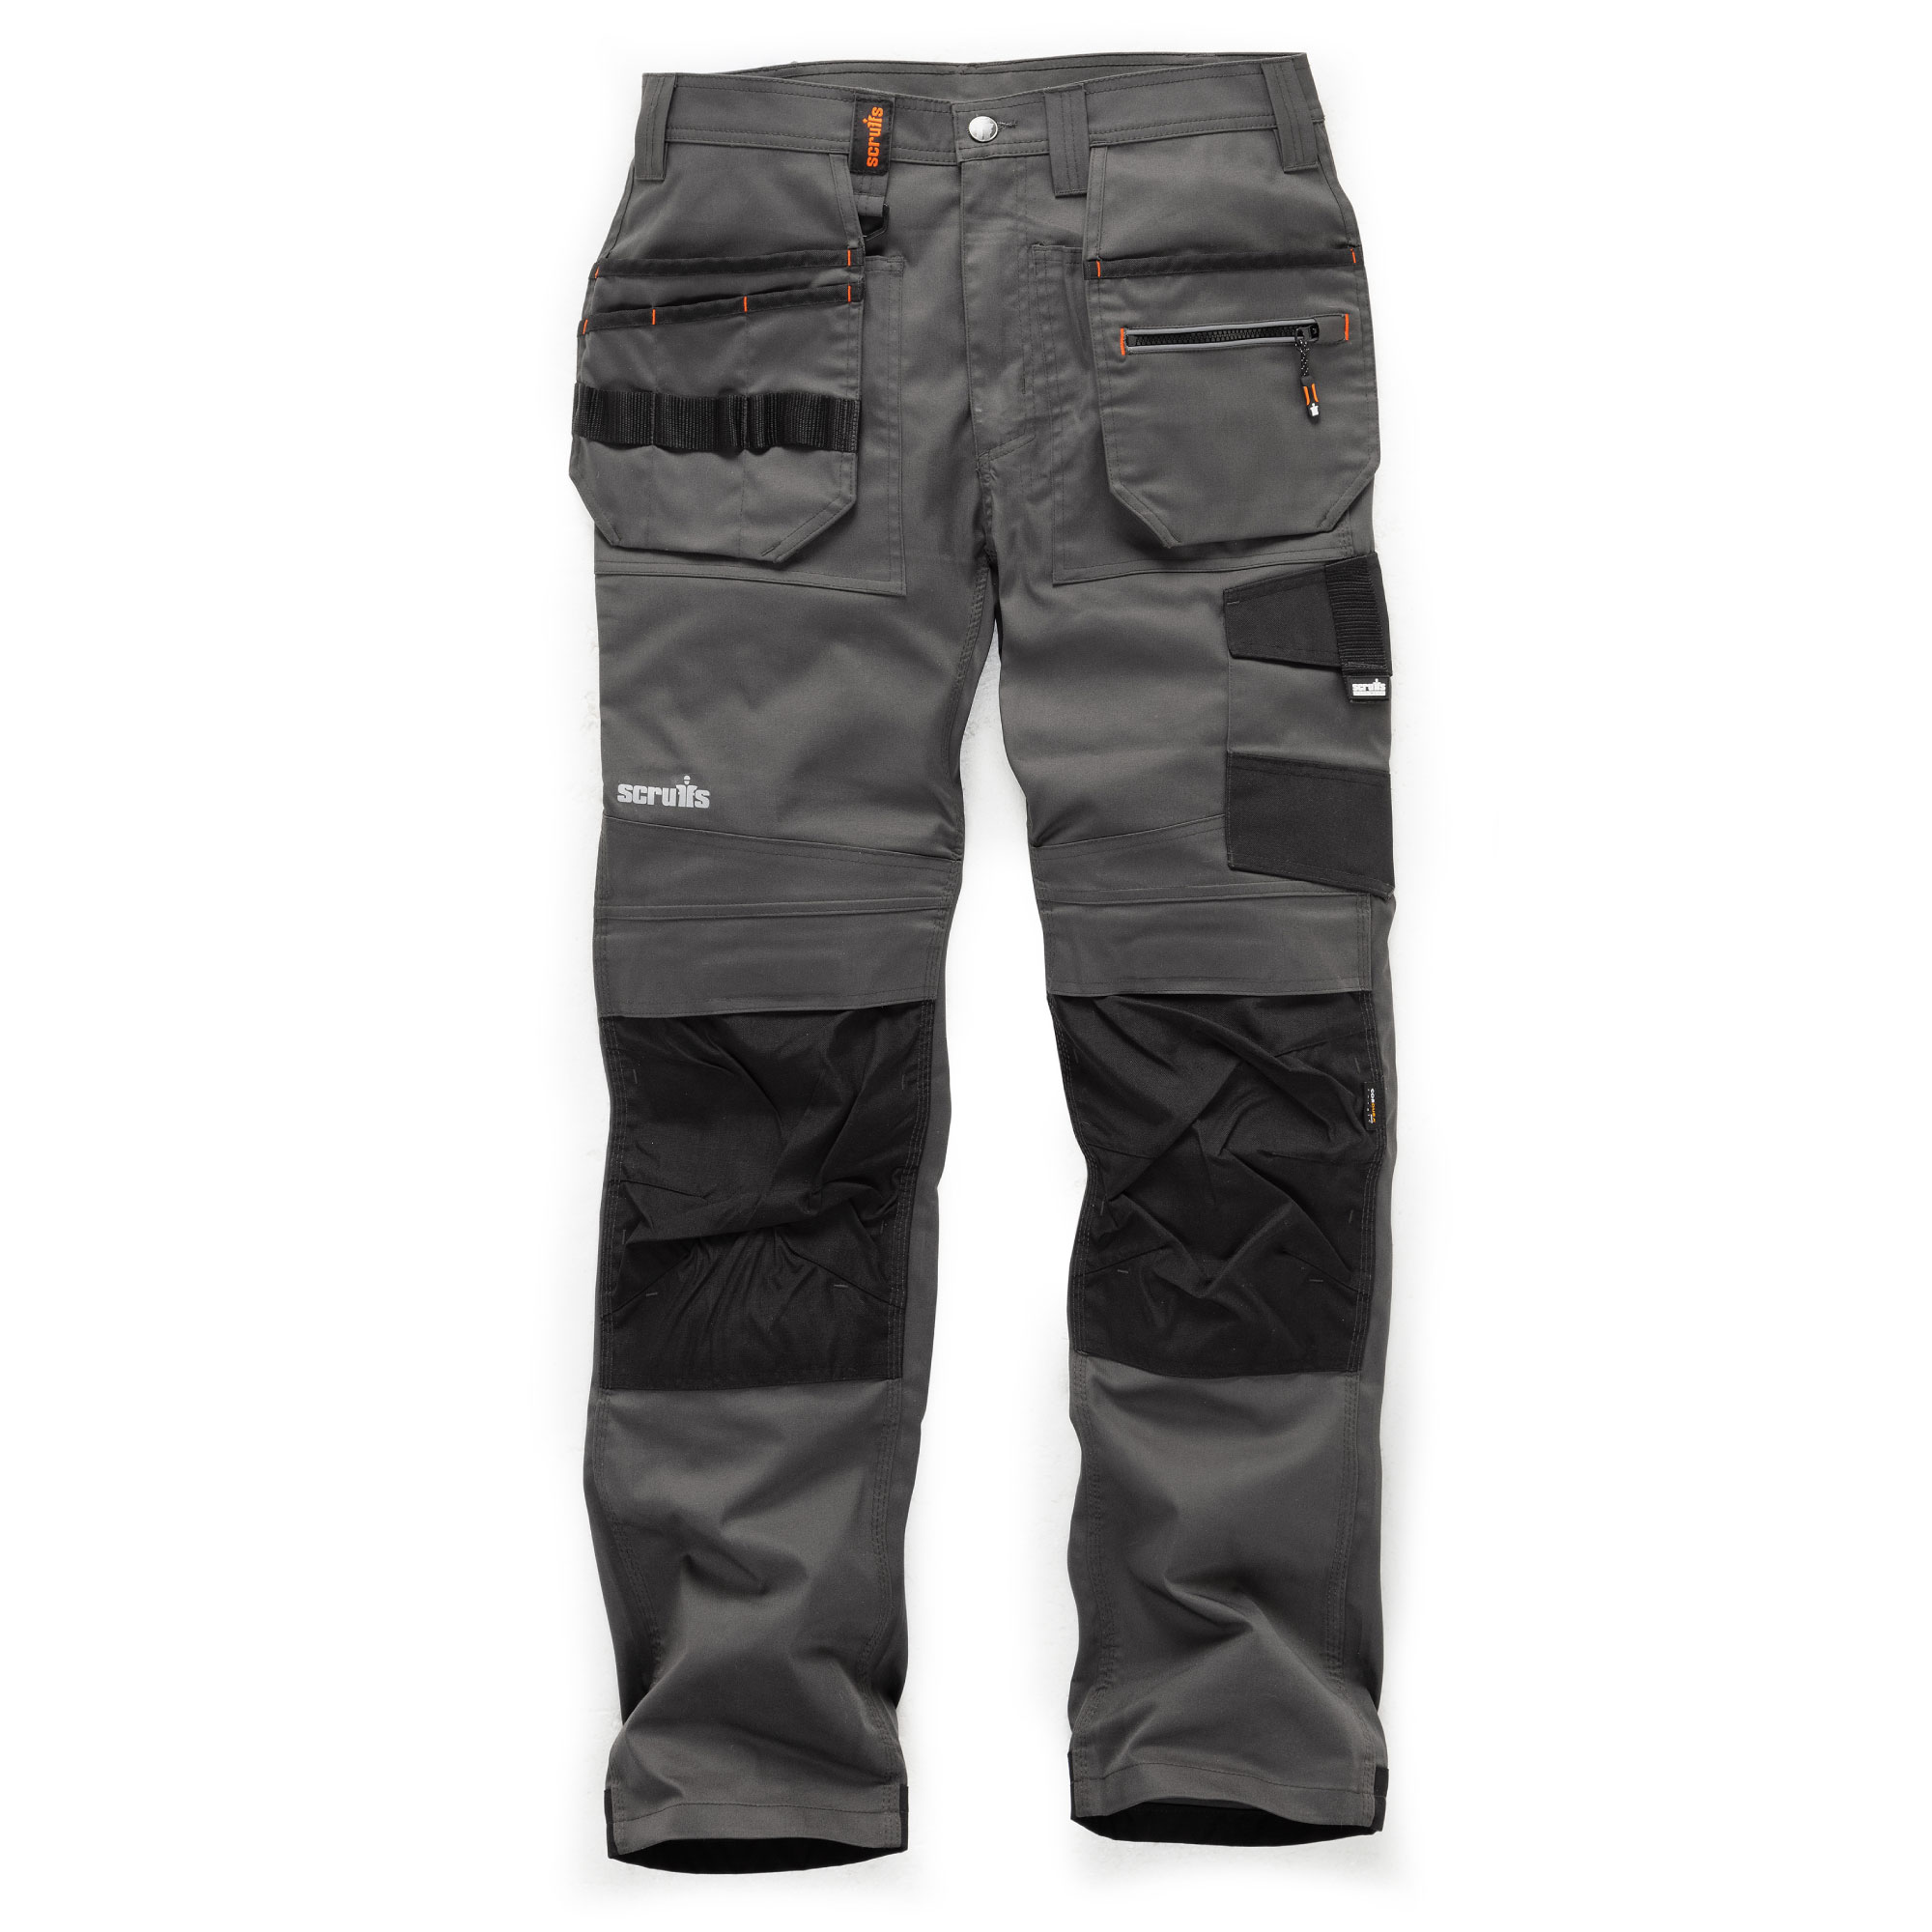 Men's Cargo Holster Pocket Work Trousers By SITE KING - Site King